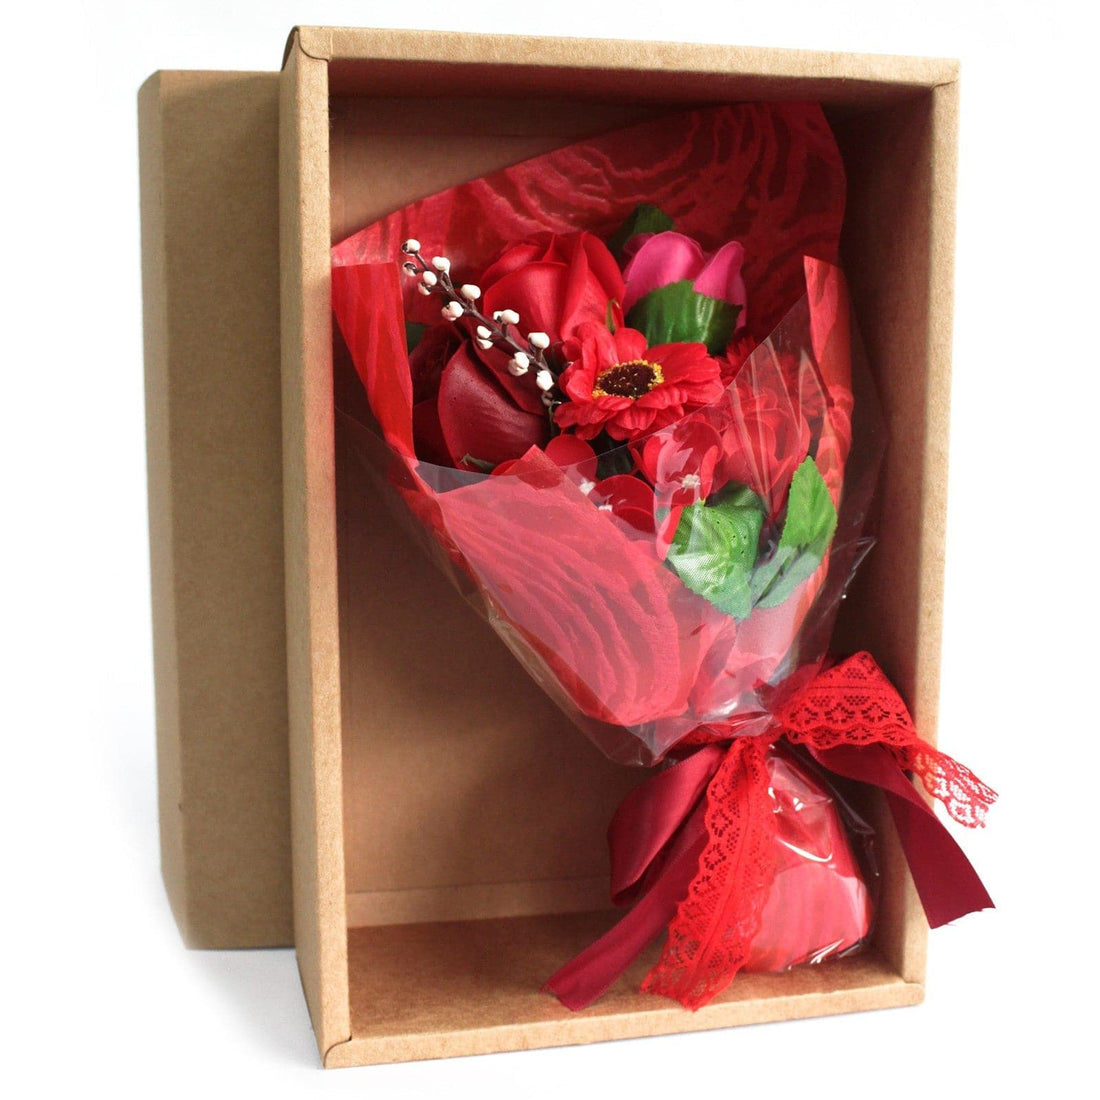 Boxed Hand Soap Flower Bouquet - Red - best price from Maltashopper.com SFB-08